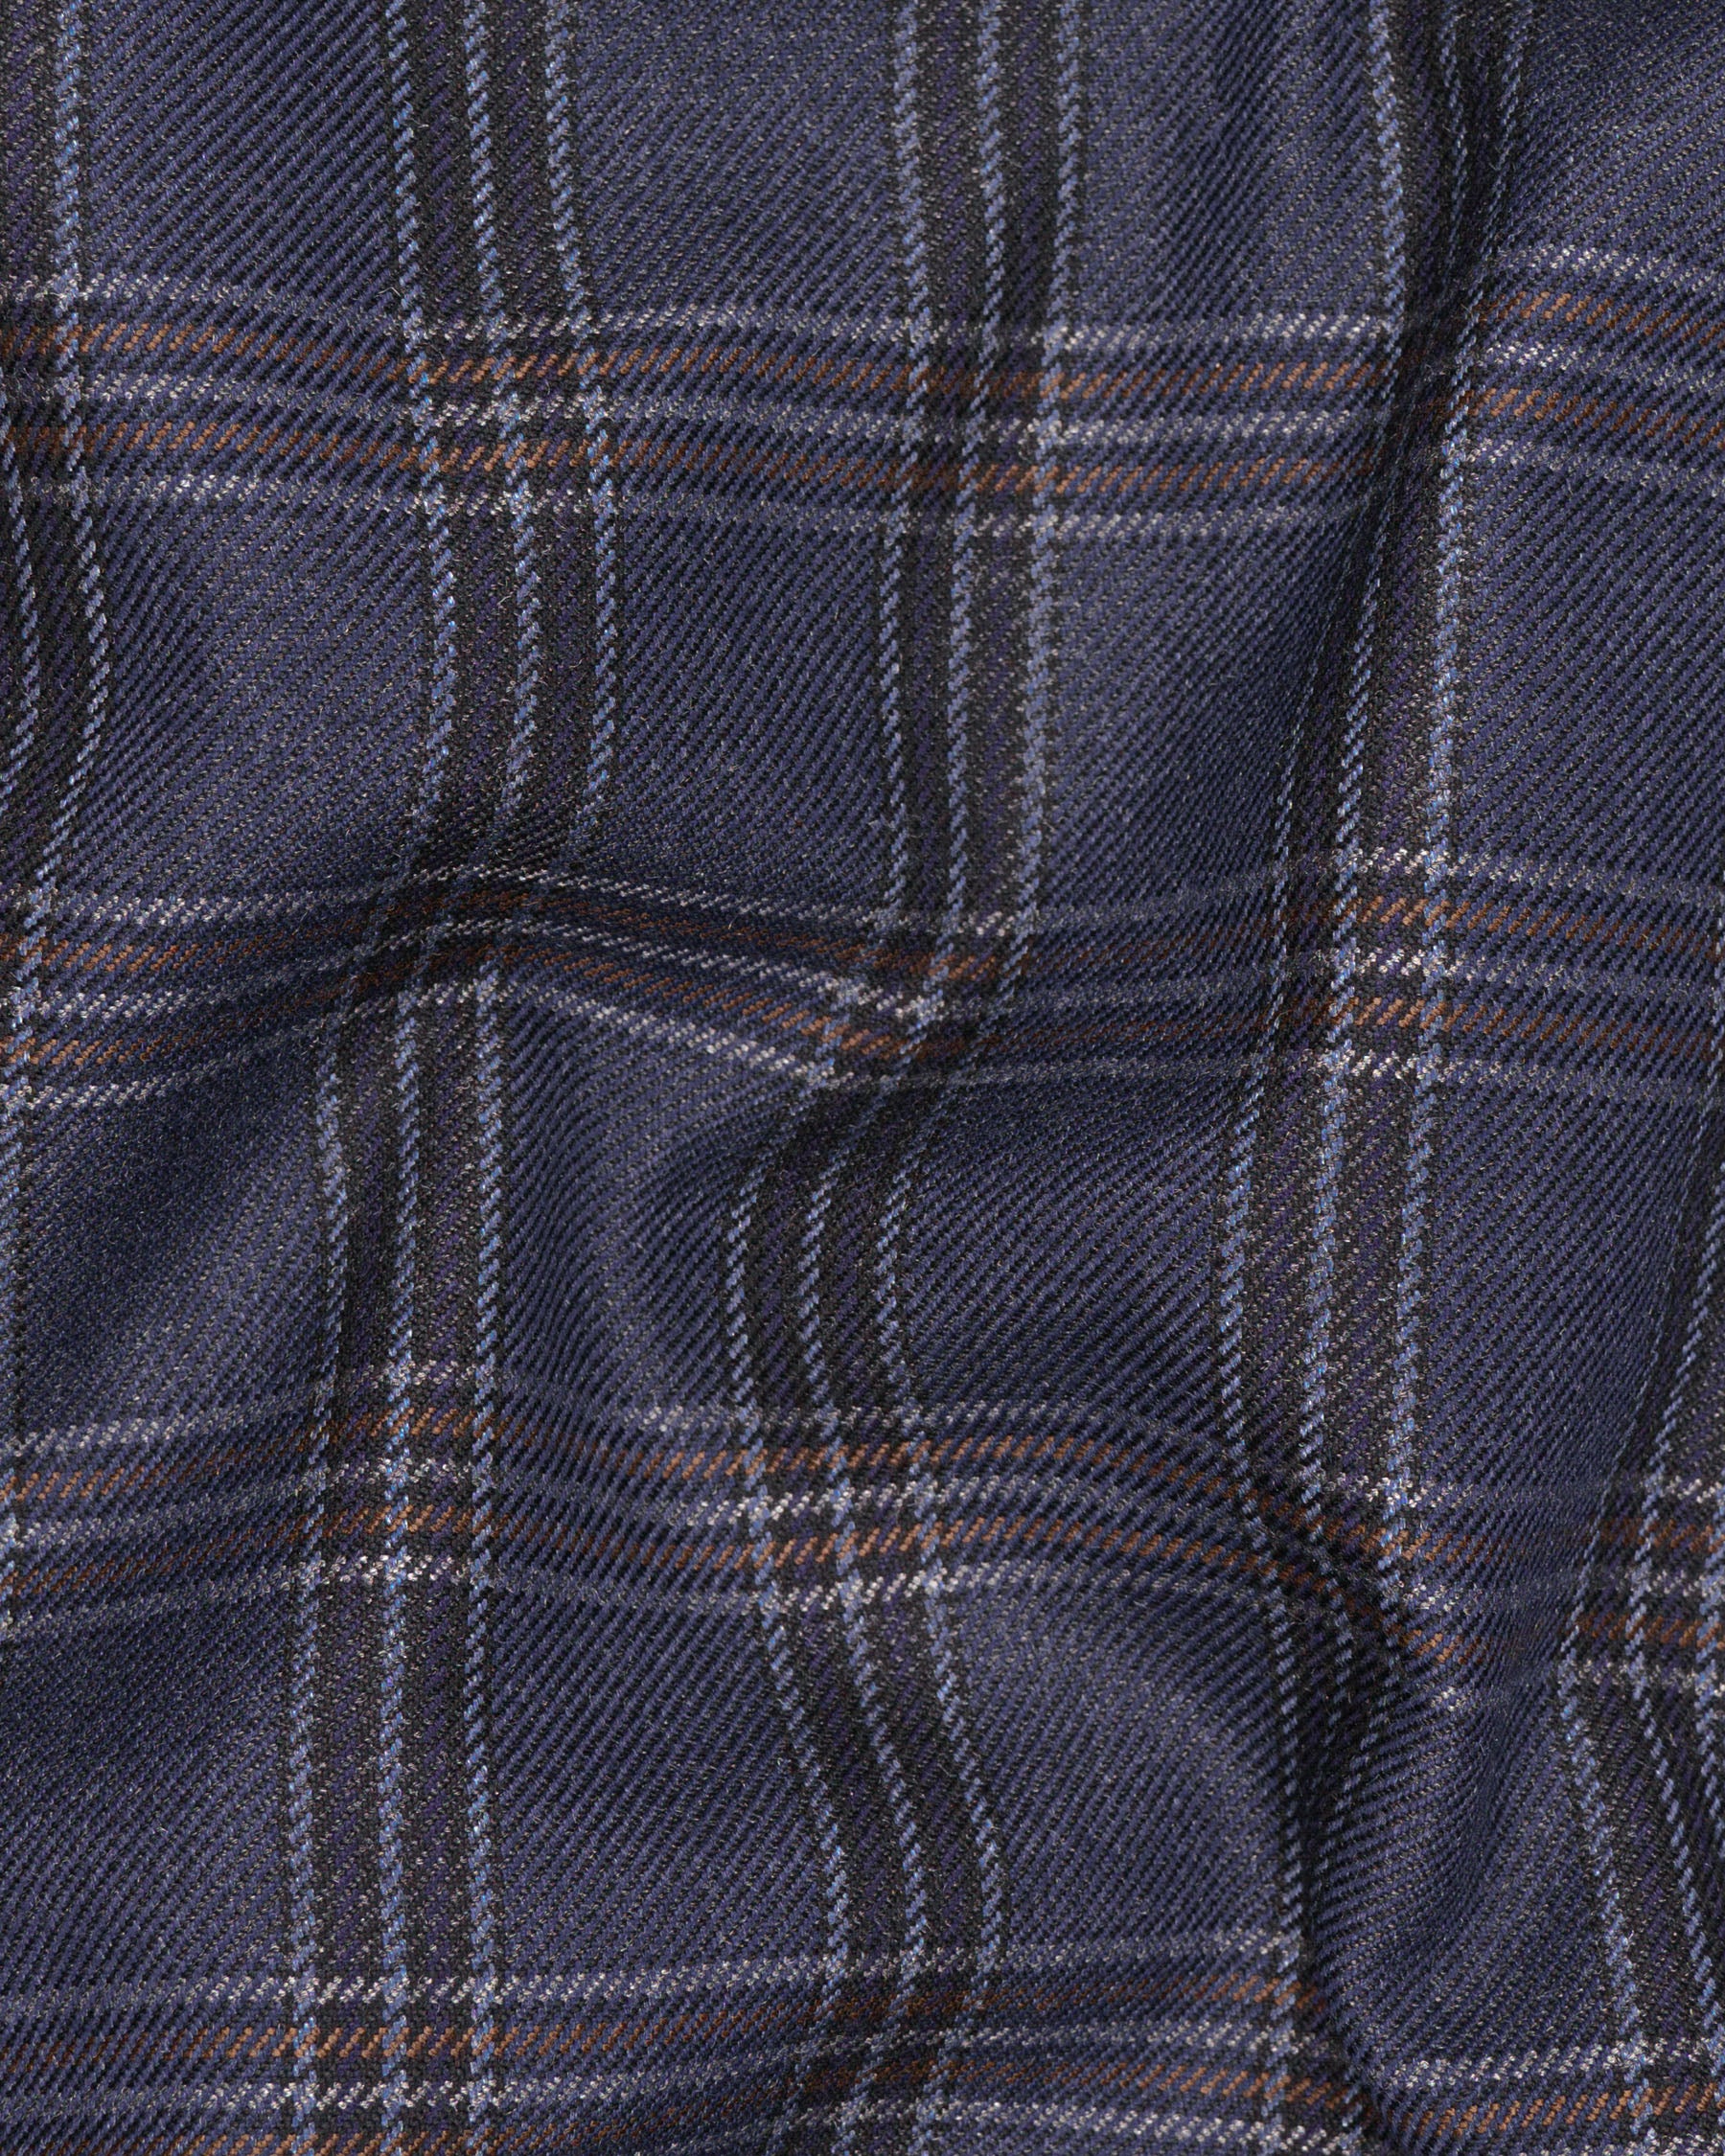 Licorice STue Plaid heavyweight tweed Wool Rich DouSTe Breasted Suit  ST1453-DB-PP-36,ST1453-DB-PP-38,ST1453-DB-PP-40,ST1453-DB-PP-42,ST1453-DB-PP-44,ST1453-DB-PP-46,ST1453-DB-PP-48,ST1453-DB-PP-50,ST1453-DB-PP-52,ST1453-DB-PP-54,ST1453-DB-PP-56,ST1453-DB-PP-58,ST1453-DB-PP-60